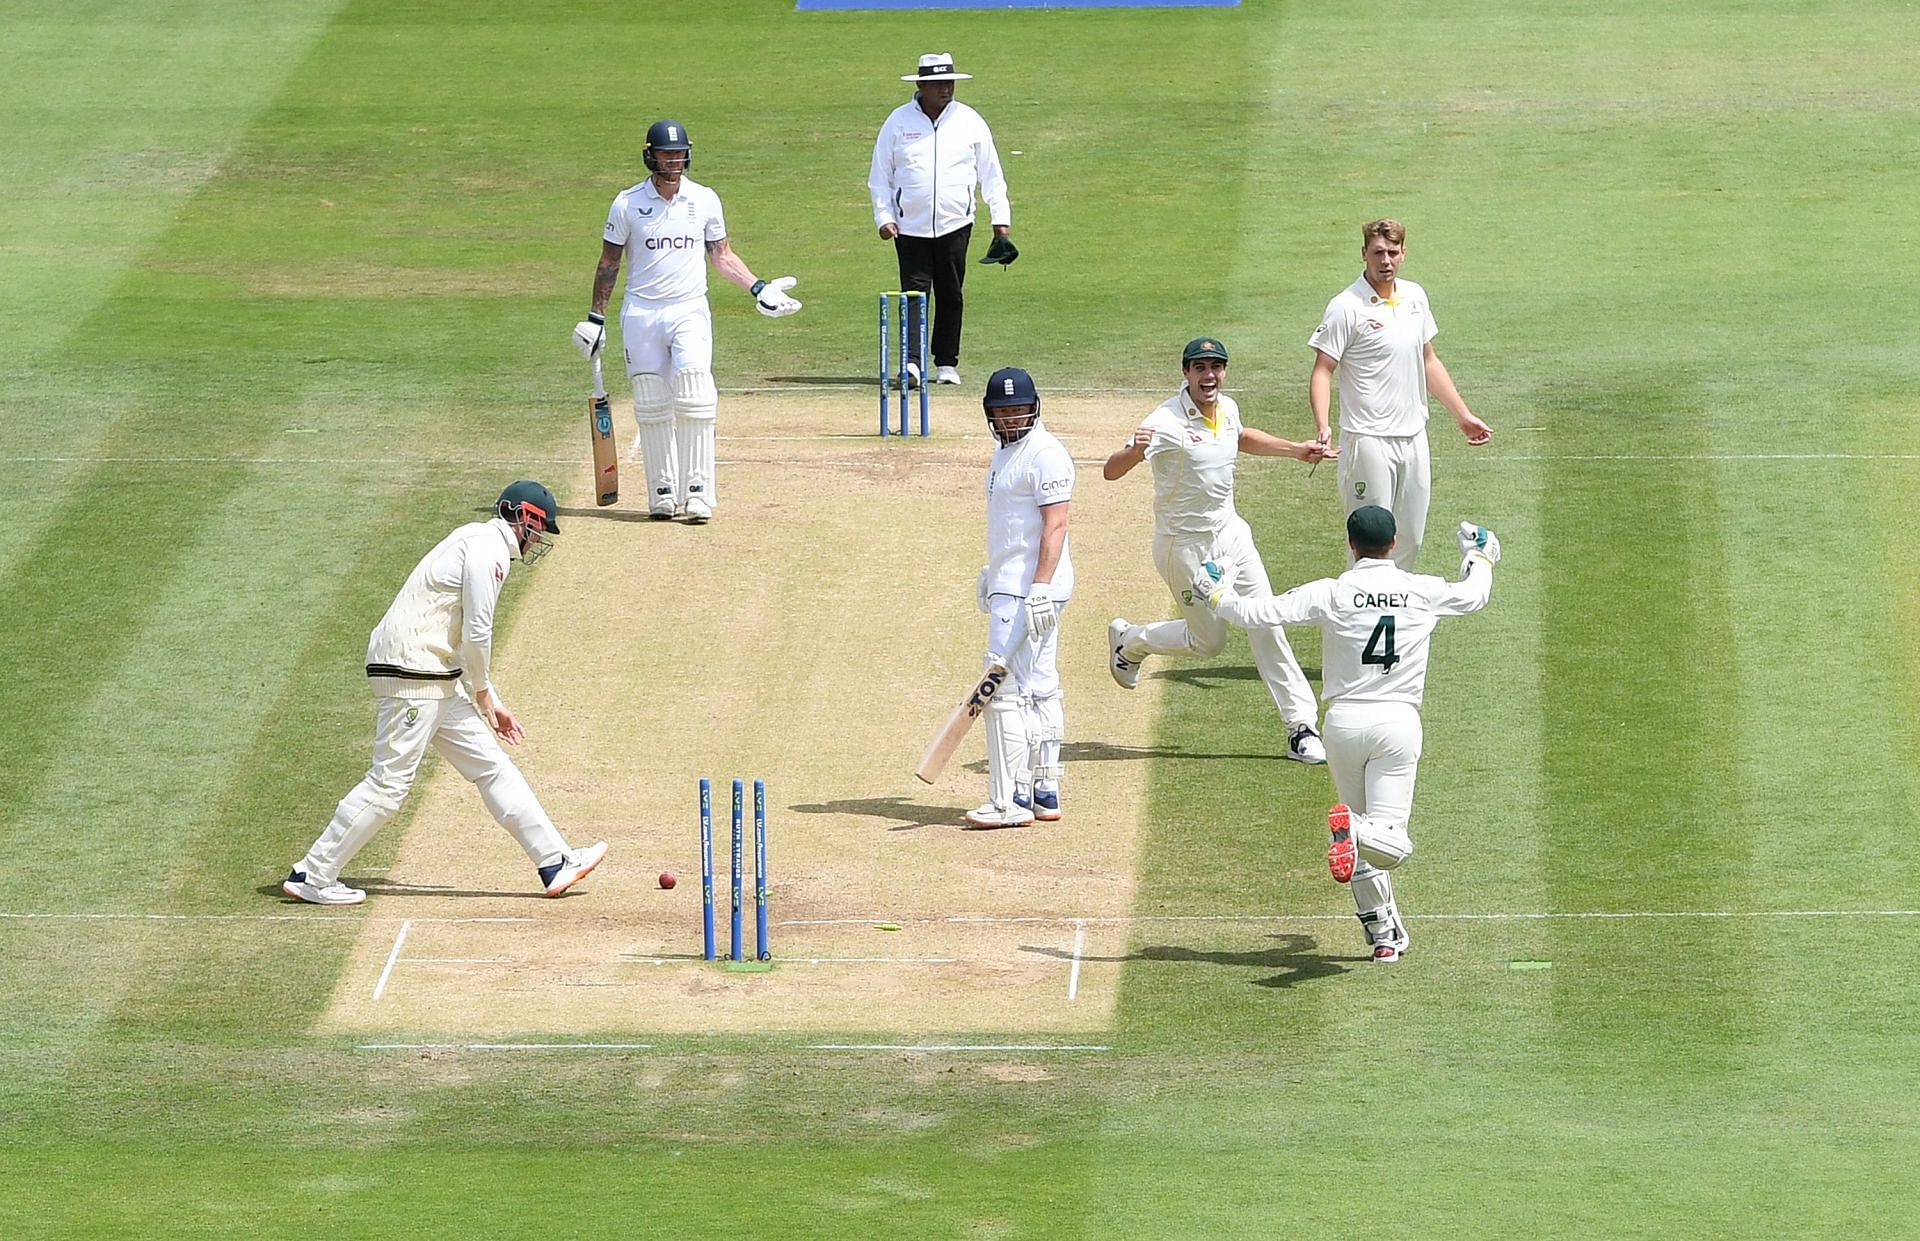 Jonny Bairstow was stumped by Alex Carey off Cameron Green&#039;s bowling.